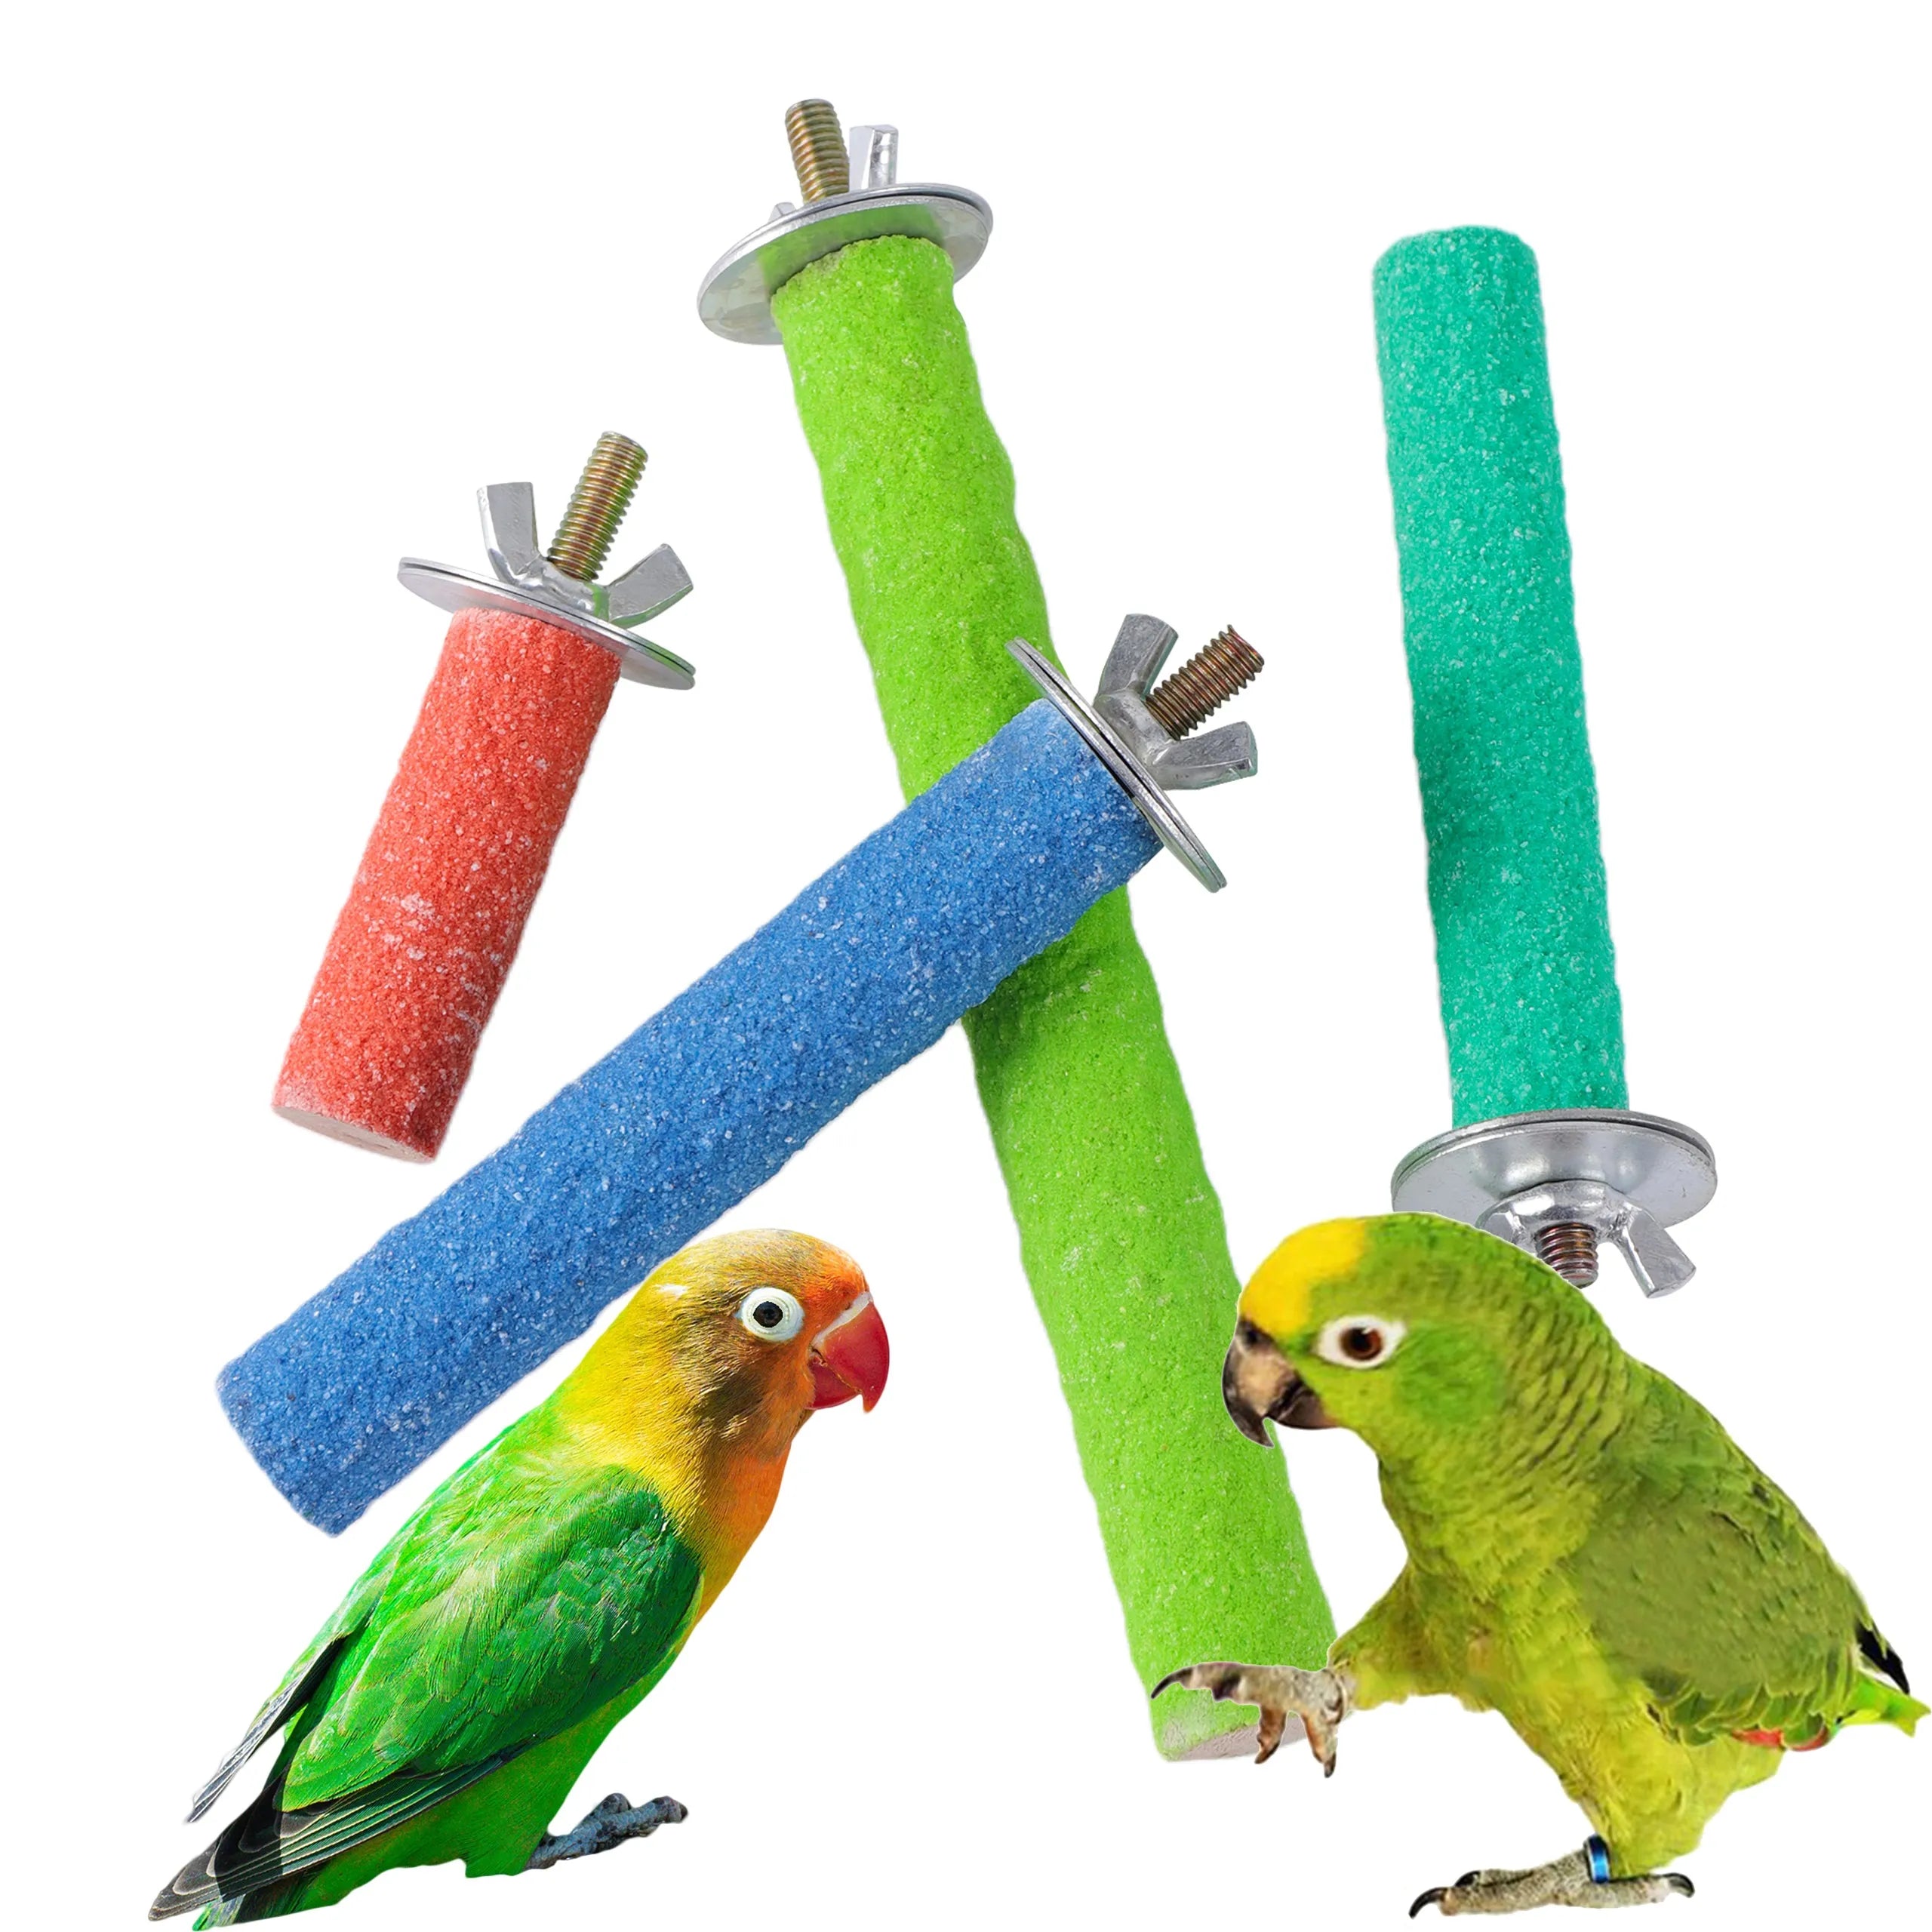 Parrot Perching Station: Interactive Bird Cage Toy for Entertainment  petlums.com   